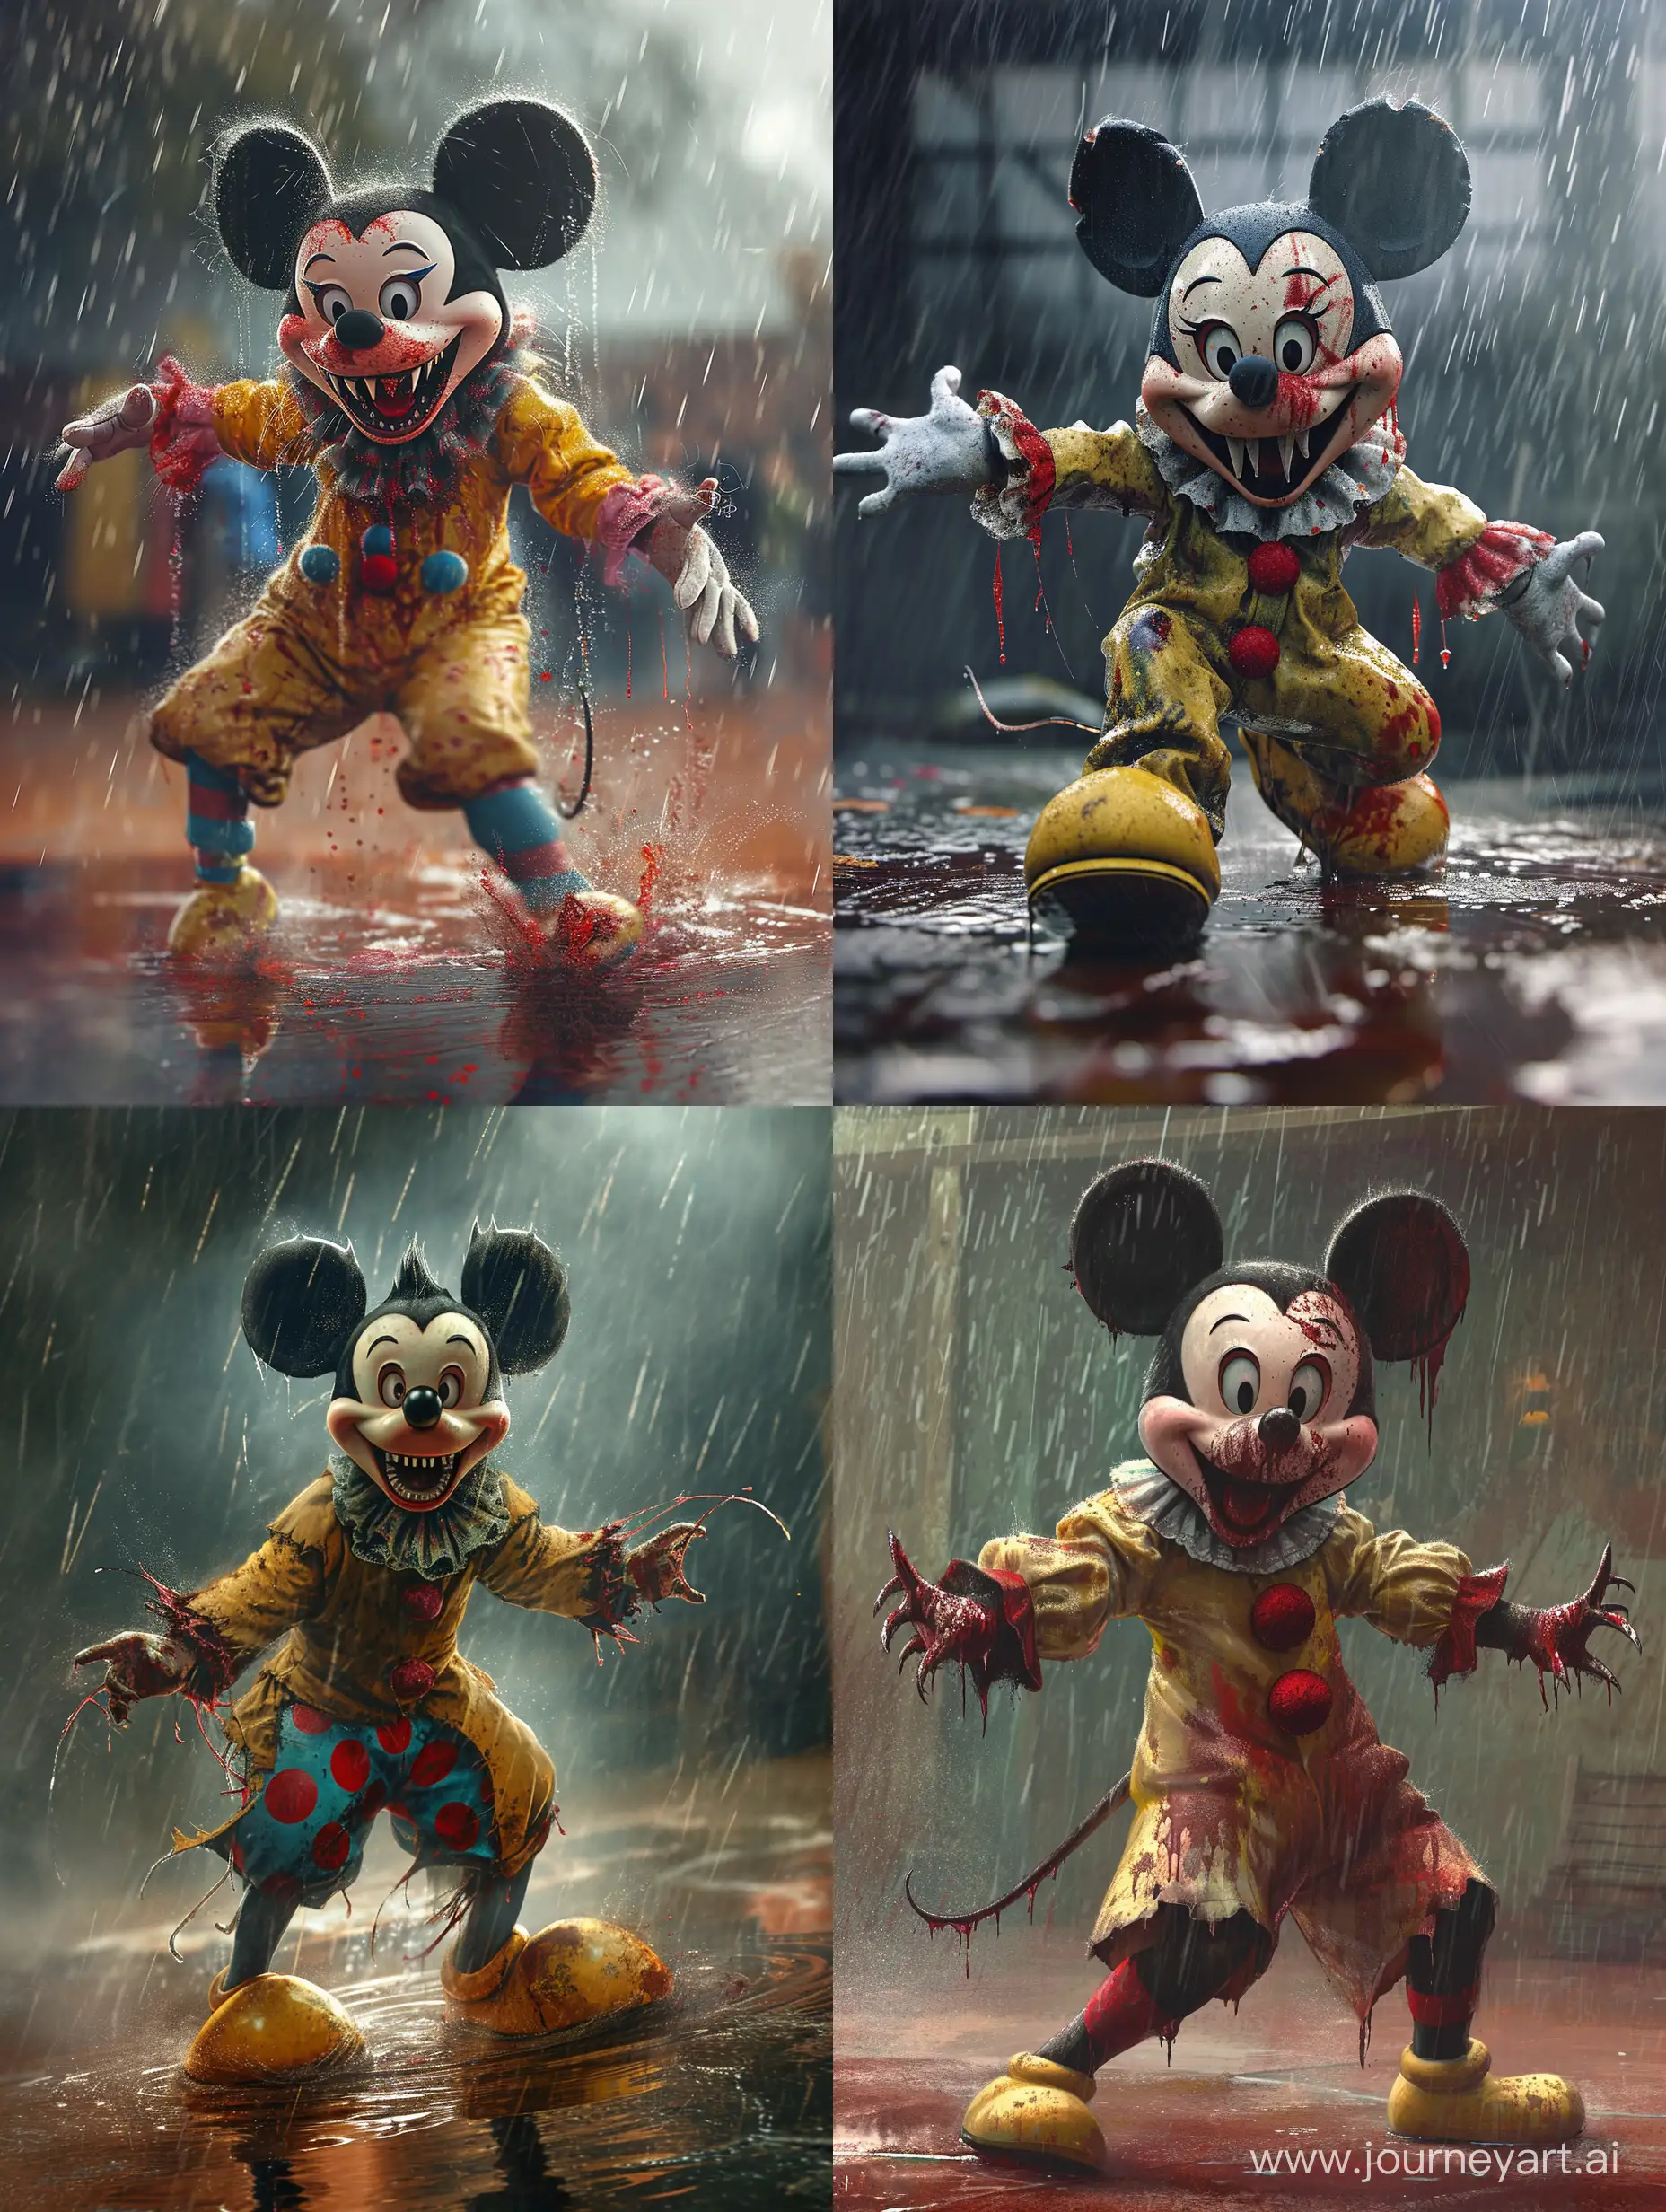 Sinister-Mickey-Mouse-Dancing-in-the-Rain-with-Sharp-Teeth